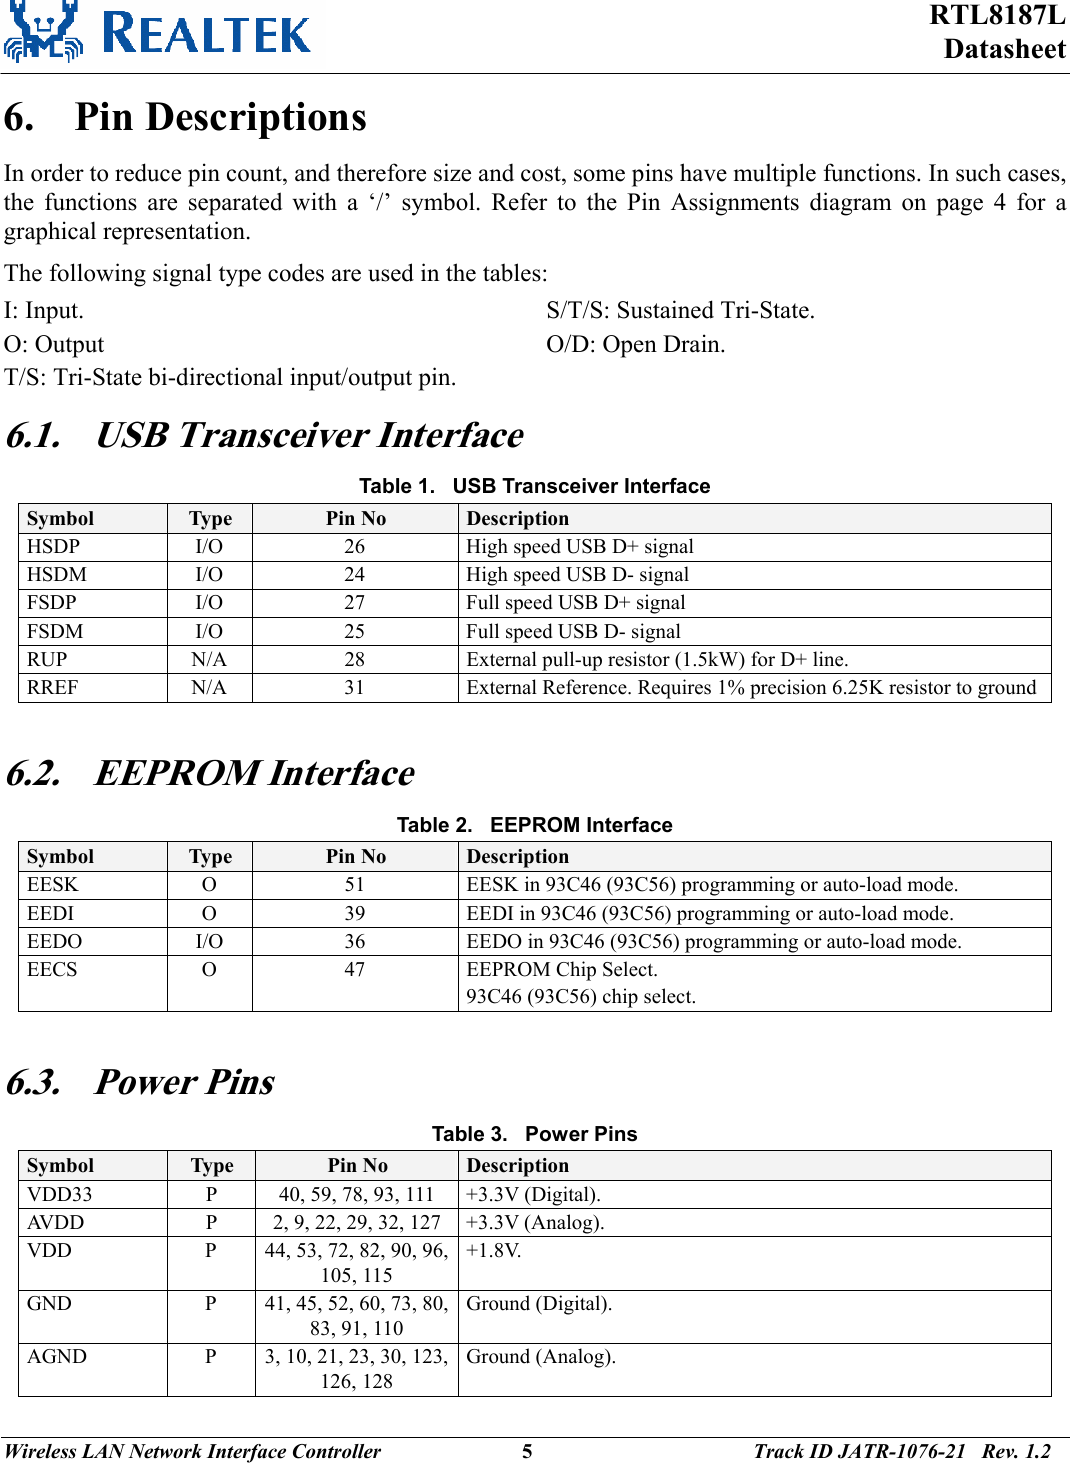 RTL8187L Datasheet Wireless LAN Network Interface Controller                           5                                          Track ID JATR-1076-21   Rev. 1.2  6. Pin Descriptions In order to reduce pin count, and therefore size and cost, some pins have multiple functions. In such cases, the functions are separated with a ‘/’ symbol. Refer to the Pin Assignments diagram on page 4 for a graphical representation. The following signal type codes are used in the tables: I: Input. O: Output T/S: Tri-State bi-directional input/output pin. S/T/S: Sustained Tri-State. O/D: Open Drain. 6.1. USB Transceiver Interface Table 1.   USB Transceiver Interface Symbol  Type  Pin No  Description HSDP  I/O  26  High speed USB D+ signal HSDM  I/O  24  High speed USB D- signal FSDP  I/O  27  Full speed USB D+ signal FSDM  I/O  25  Full speed USB D- signal RUP  N/A  28  External pull-up resistor (1.5kW) for D+ line. RREF  N/A  31  External Reference. Requires 1% precision 6.25K resistor to ground  6.2. EEPROM Interface Table 2.   EEPROM Interface Symbol  Type  Pin No  Description EESK  O  51  EESK in 93C46 (93C56) programming or auto-load mode. EEDI  O  39  EEDI in 93C46 (93C56) programming or auto-load mode. EEDO  I/O  36  EEDO in 93C46 (93C56) programming or auto-load mode. EECS  O  47  EEPROM Chip Select. 93C46 (93C56) chip select.  6.3. Power Pins Table 3.   Power Pins Symbol  Type  Pin No  Description VDD33  P  40, 59, 78, 93, 111  +3.3V (Digital). AVDD  P  2, 9, 22, 29, 32, 127  +3.3V (Analog). VDD  P  44, 53, 72, 82, 90, 96, 105, 115 +1.8V. GND  P  41, 45, 52, 60, 73, 80, 83, 91, 110 Ground (Digital). AGND  P  3, 10, 21, 23, 30, 123, 126, 128 Ground (Analog). 